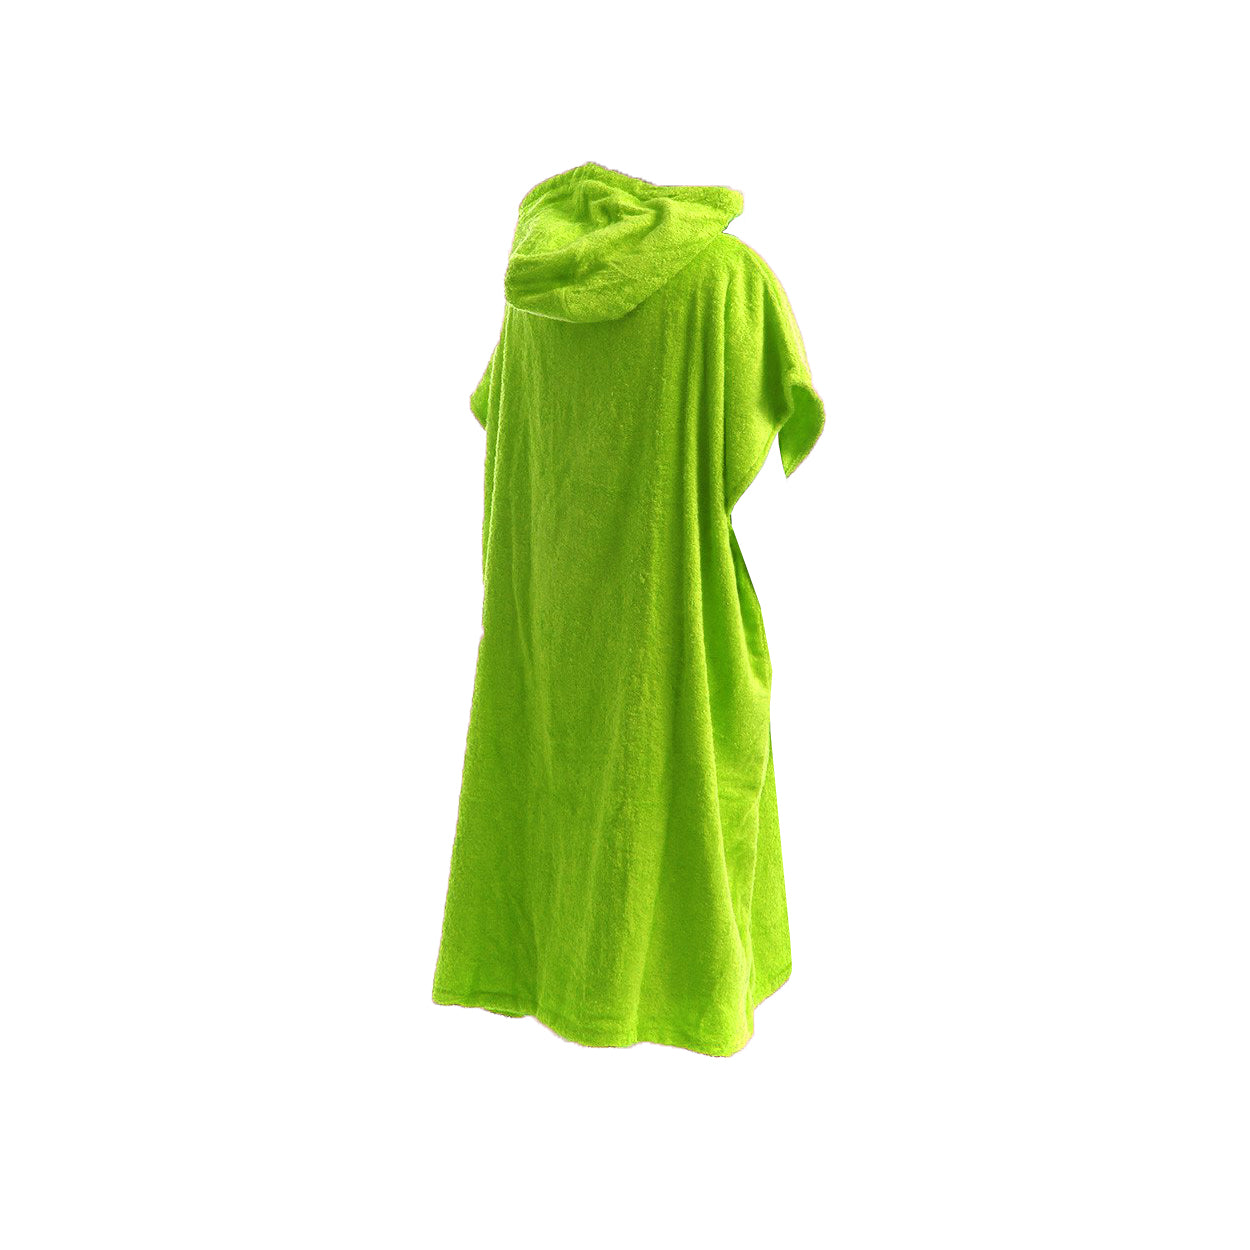 WITTERING SURF HOODED CHANGE ROBE - SEA GRASS - 3 SIZES - Wittering Surf Shop